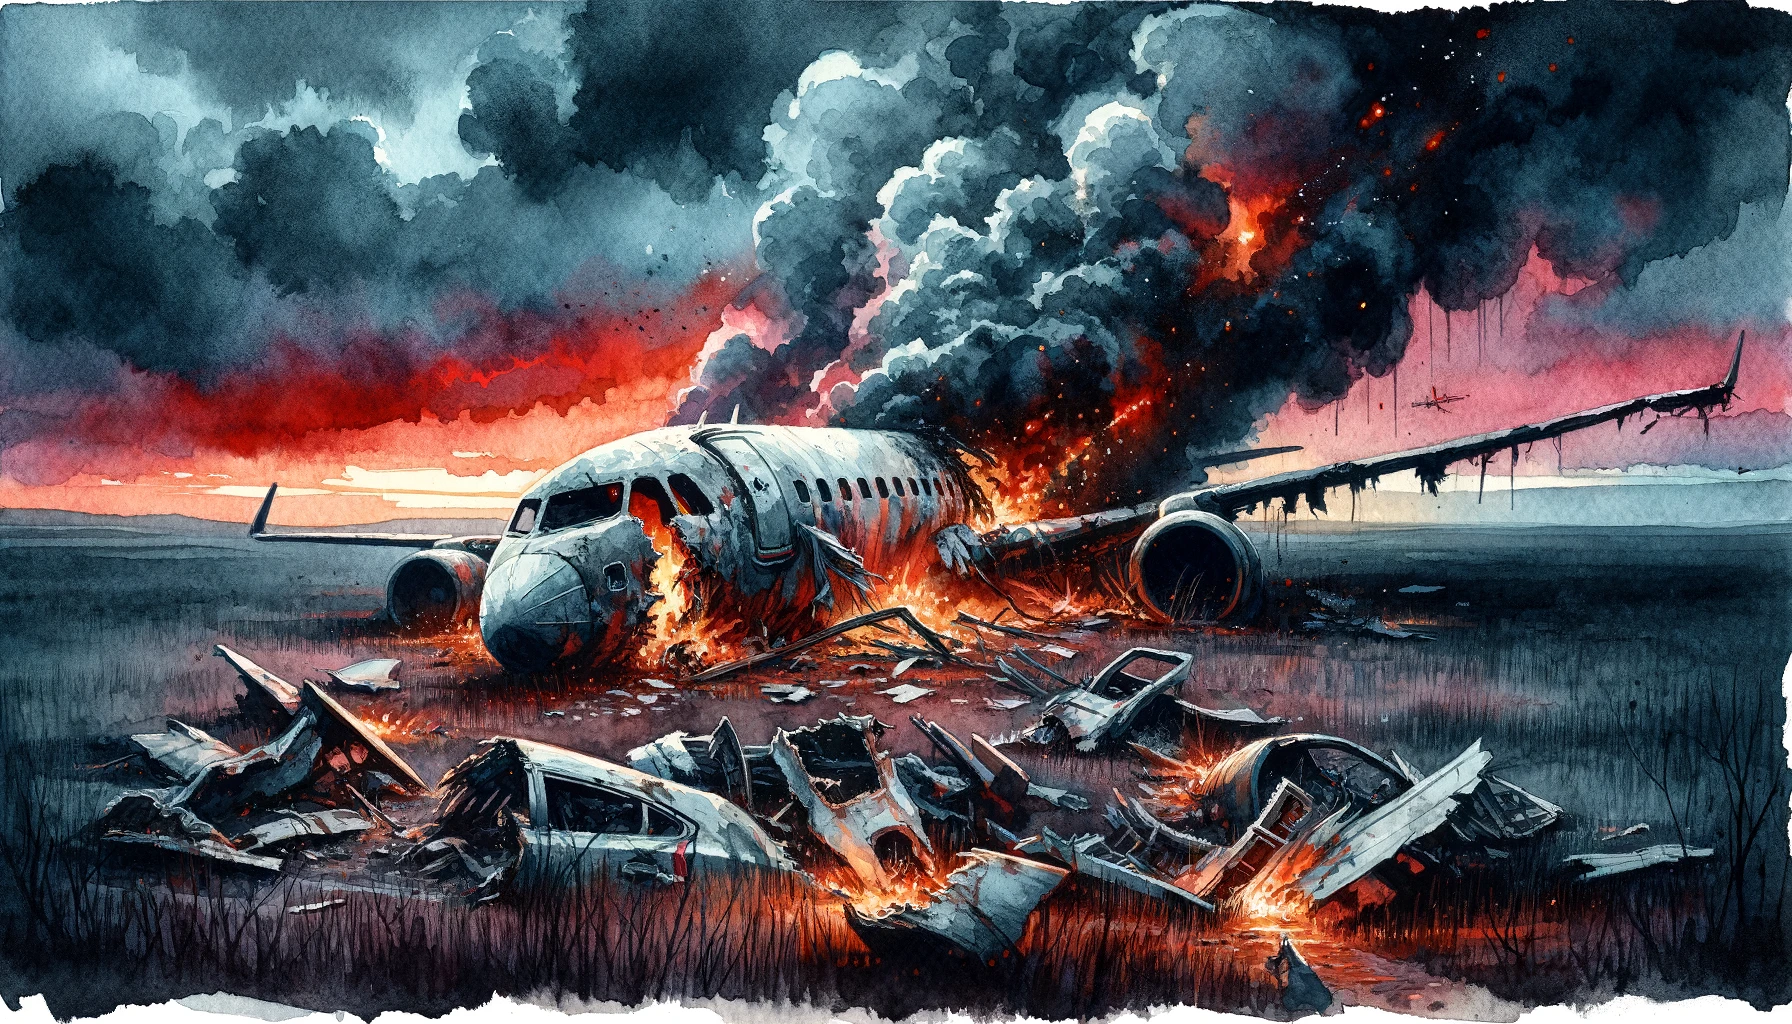 Cover image for the movies like Final Destination blog post - features an airplane crashed.